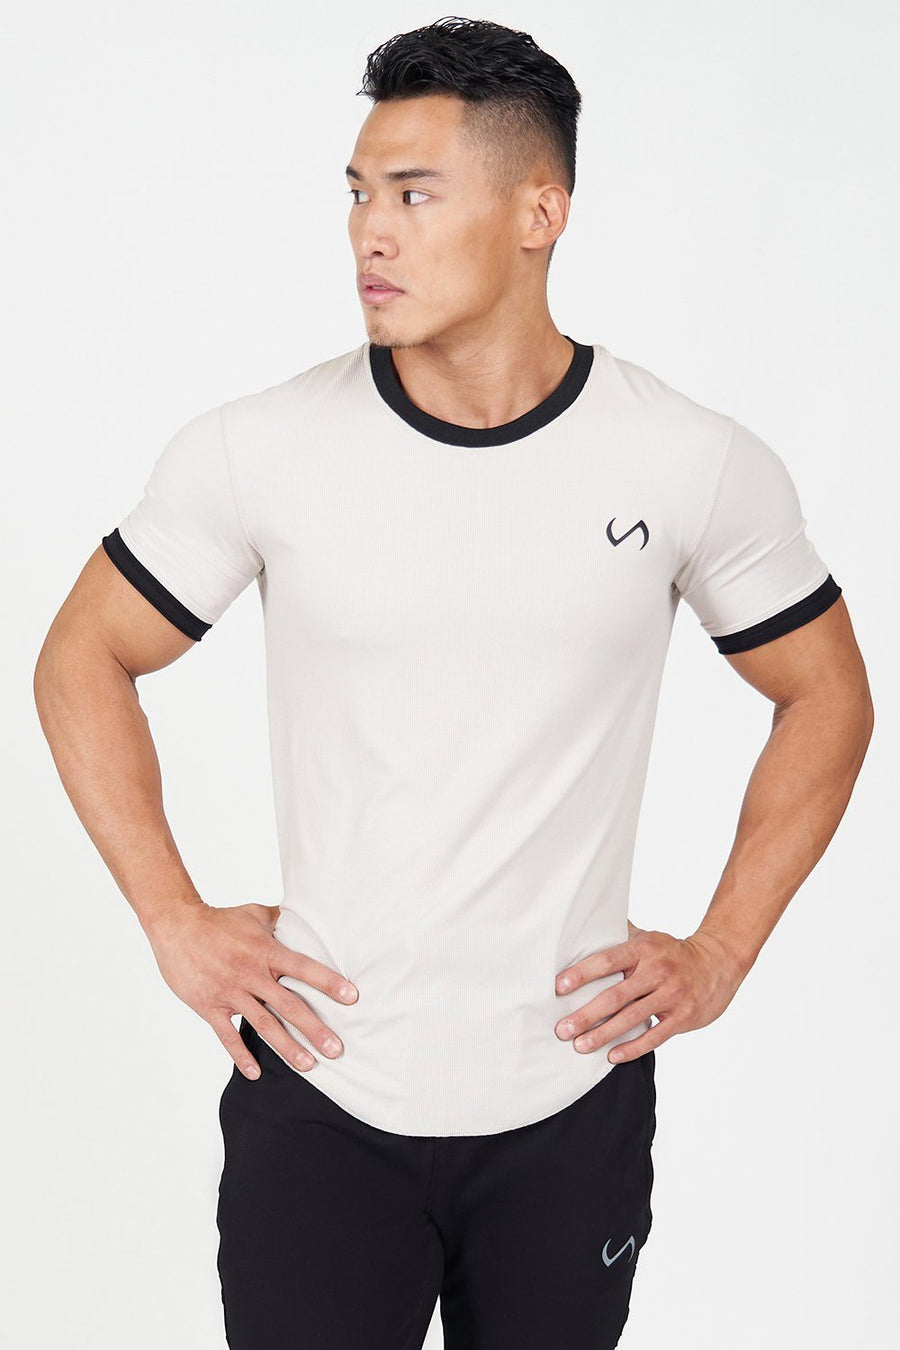 TLF Surge Classic Tee | Men's Ribbed Muscle Shirt – White - 1